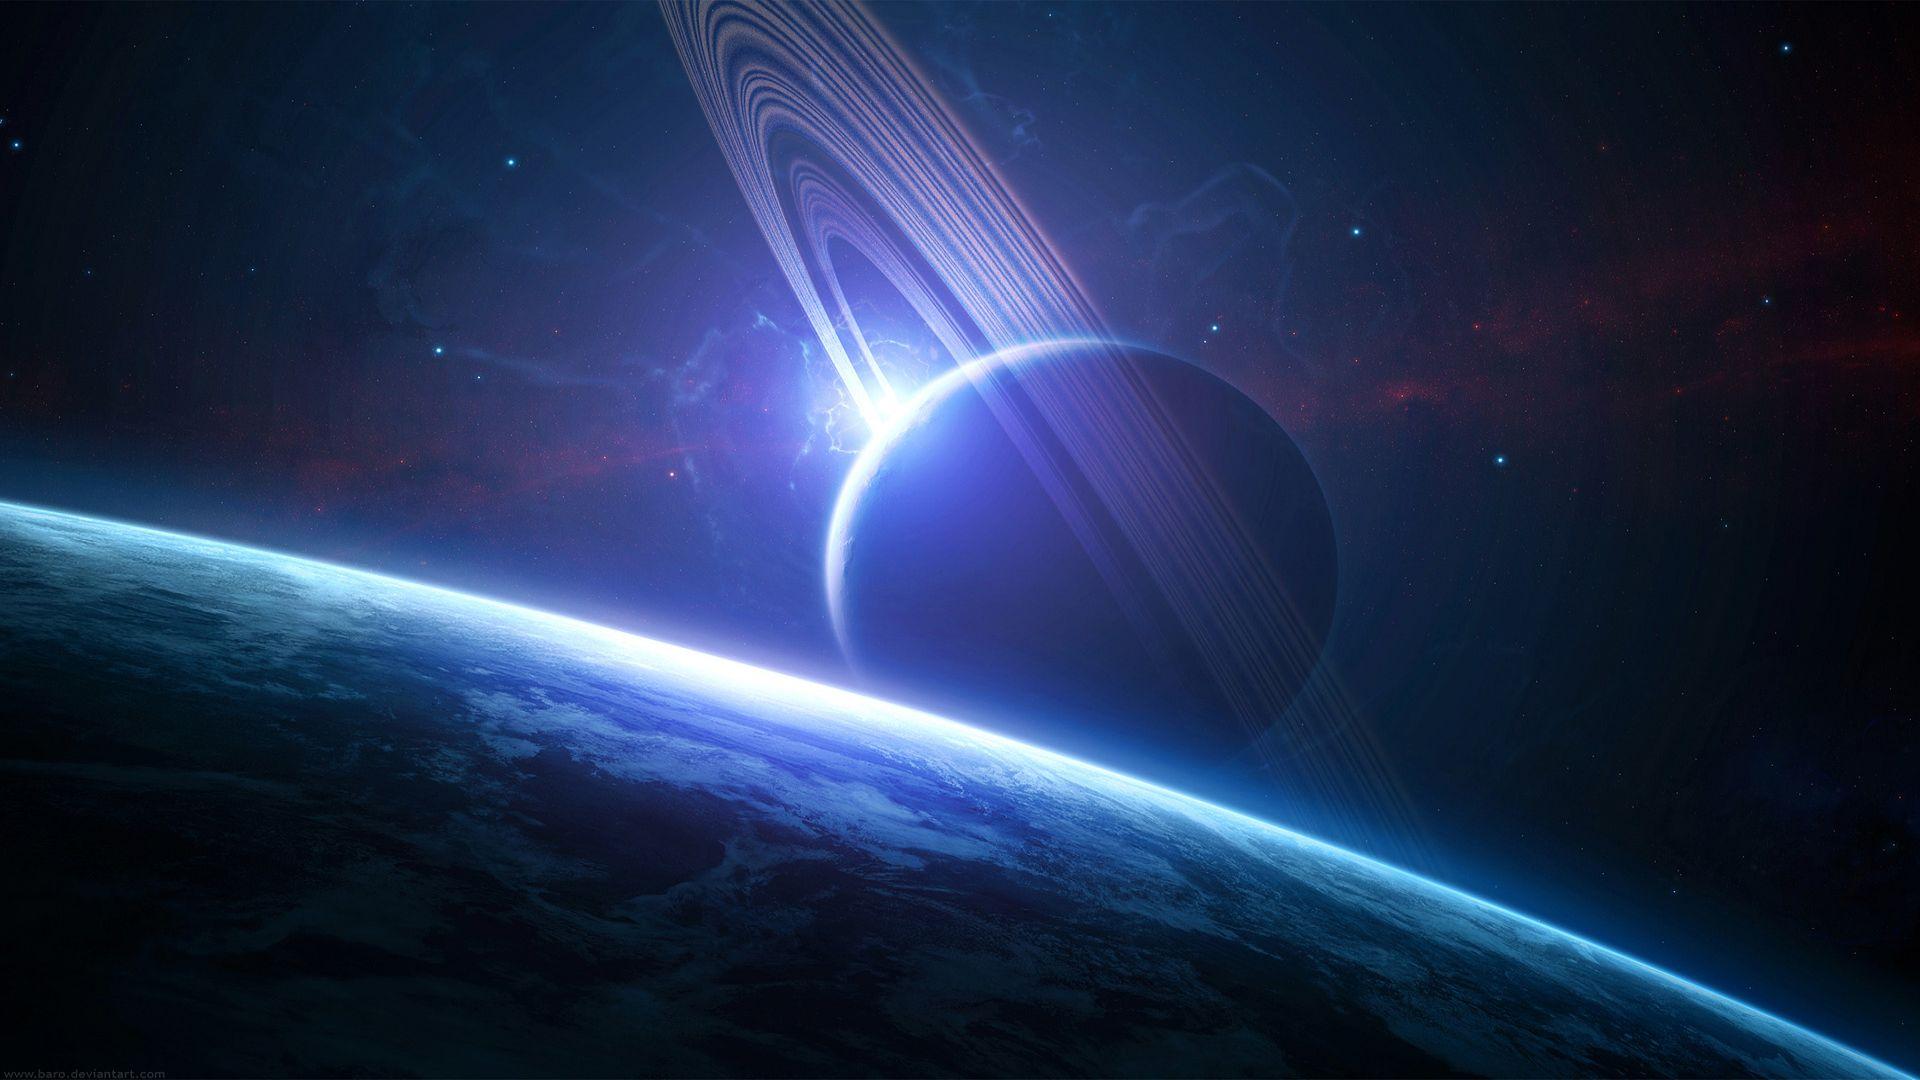 Cool Space Desktop Backgrounds 1920x1080 Image & Pictures